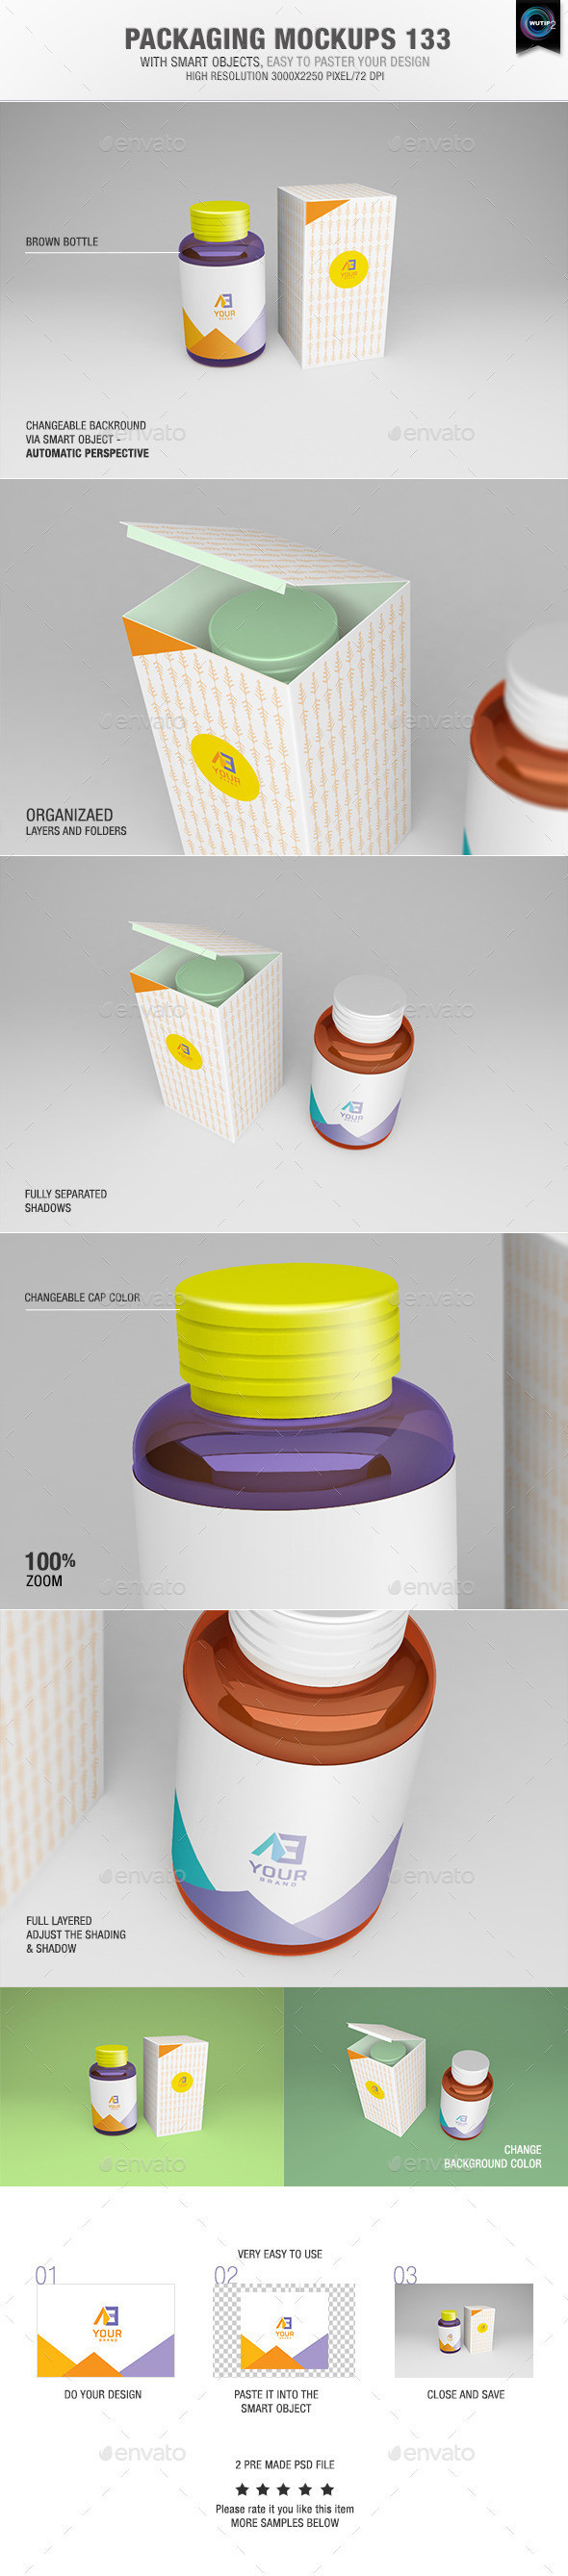 Packaging 20mockups 20133 20preview